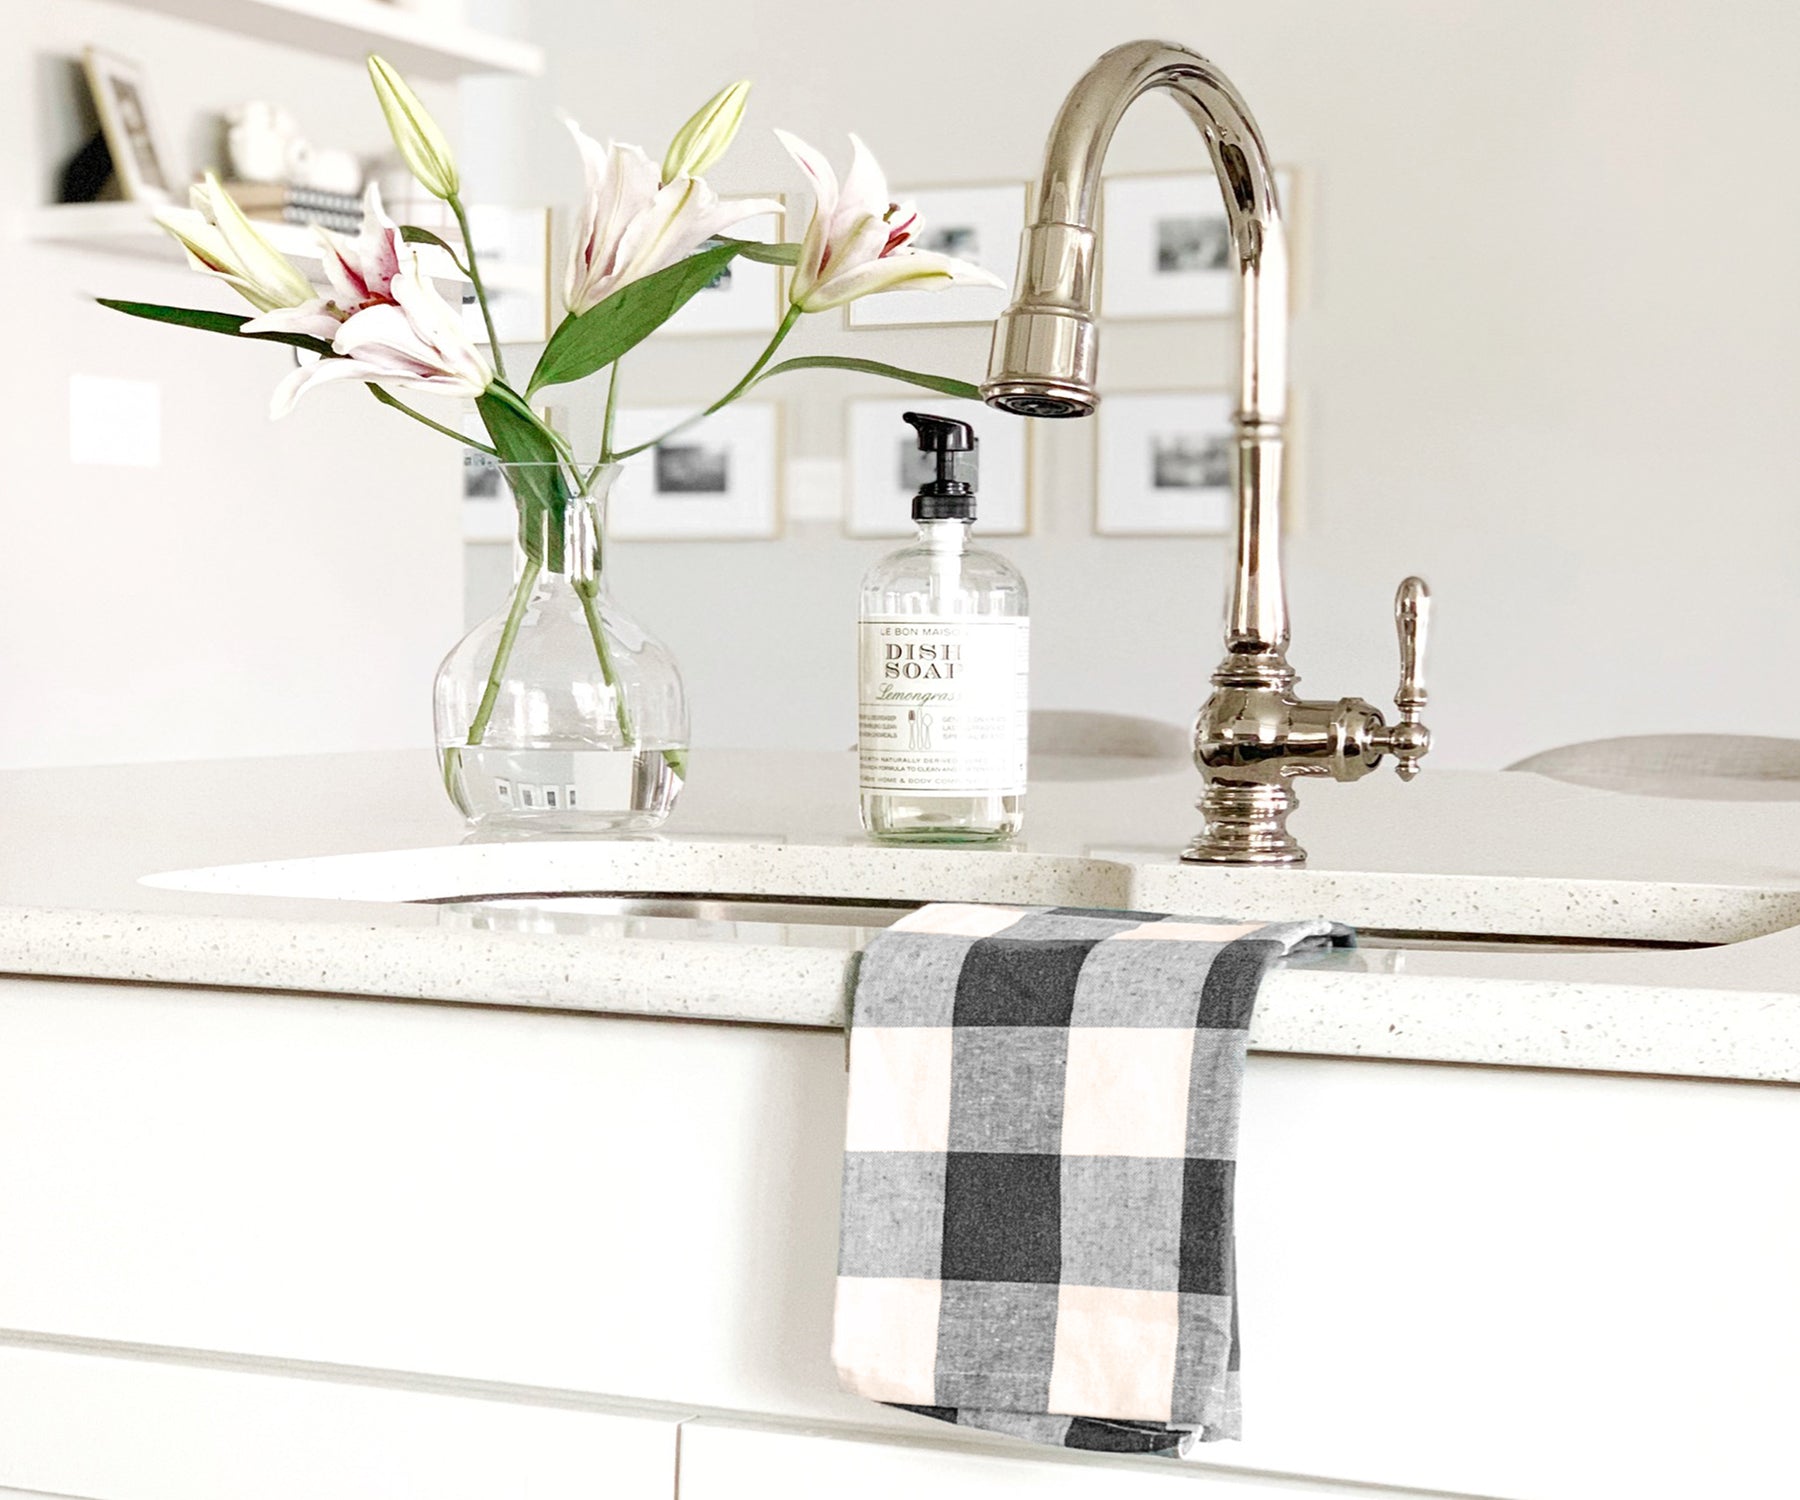 Kitchen hand towels are also a great addition to any kitchen. They are perfect for drying hands after washing up or for wiping down surfaces.